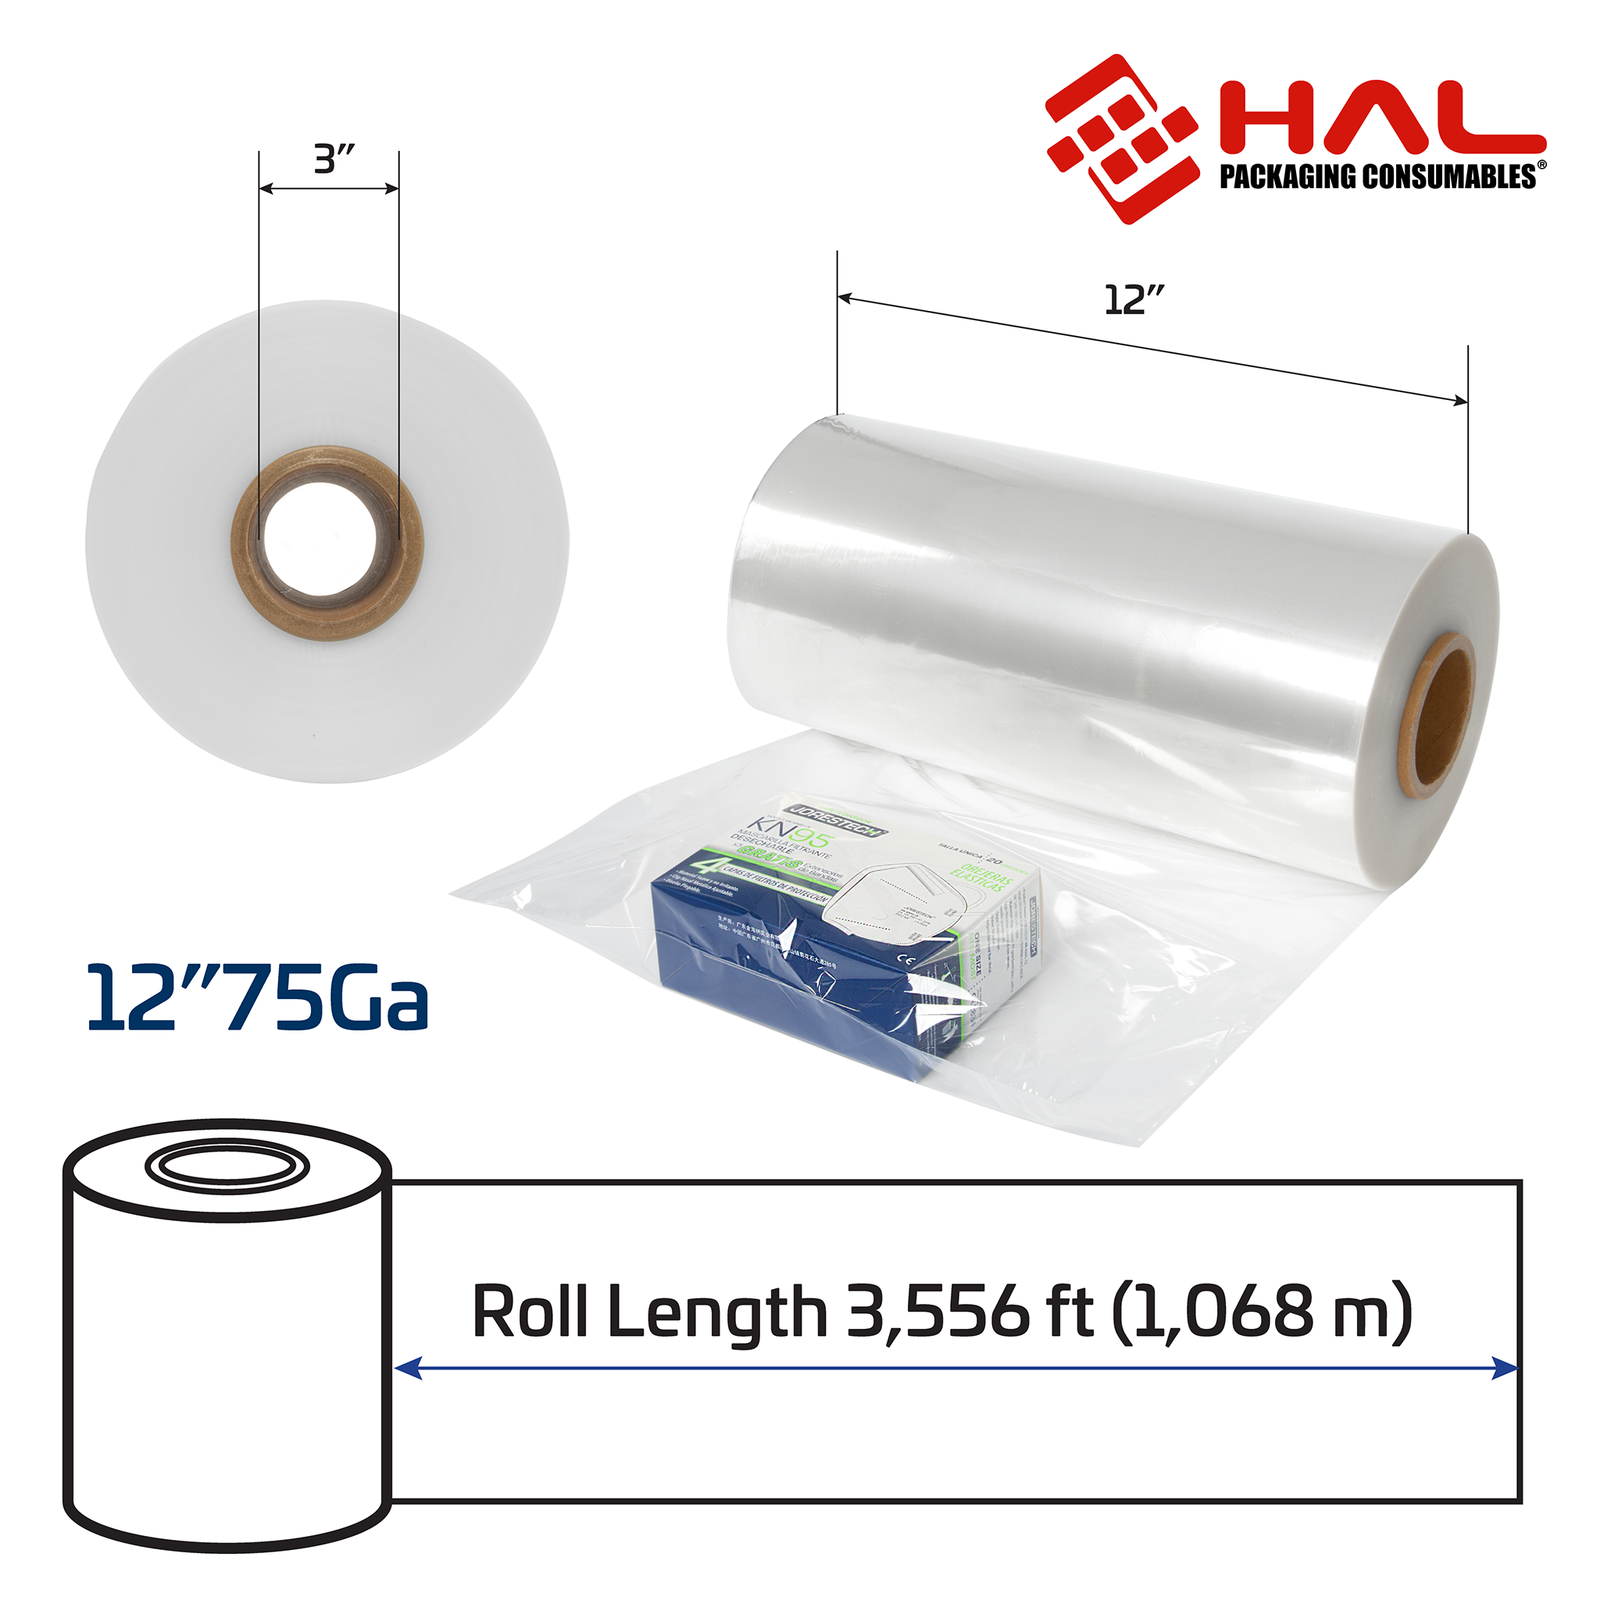 Measurements of the 75 gauge shrink wrapping film tube. 3 inch diameter of the inner core, and 12 inch width with a 3,503 ft. length (1,068 meters).